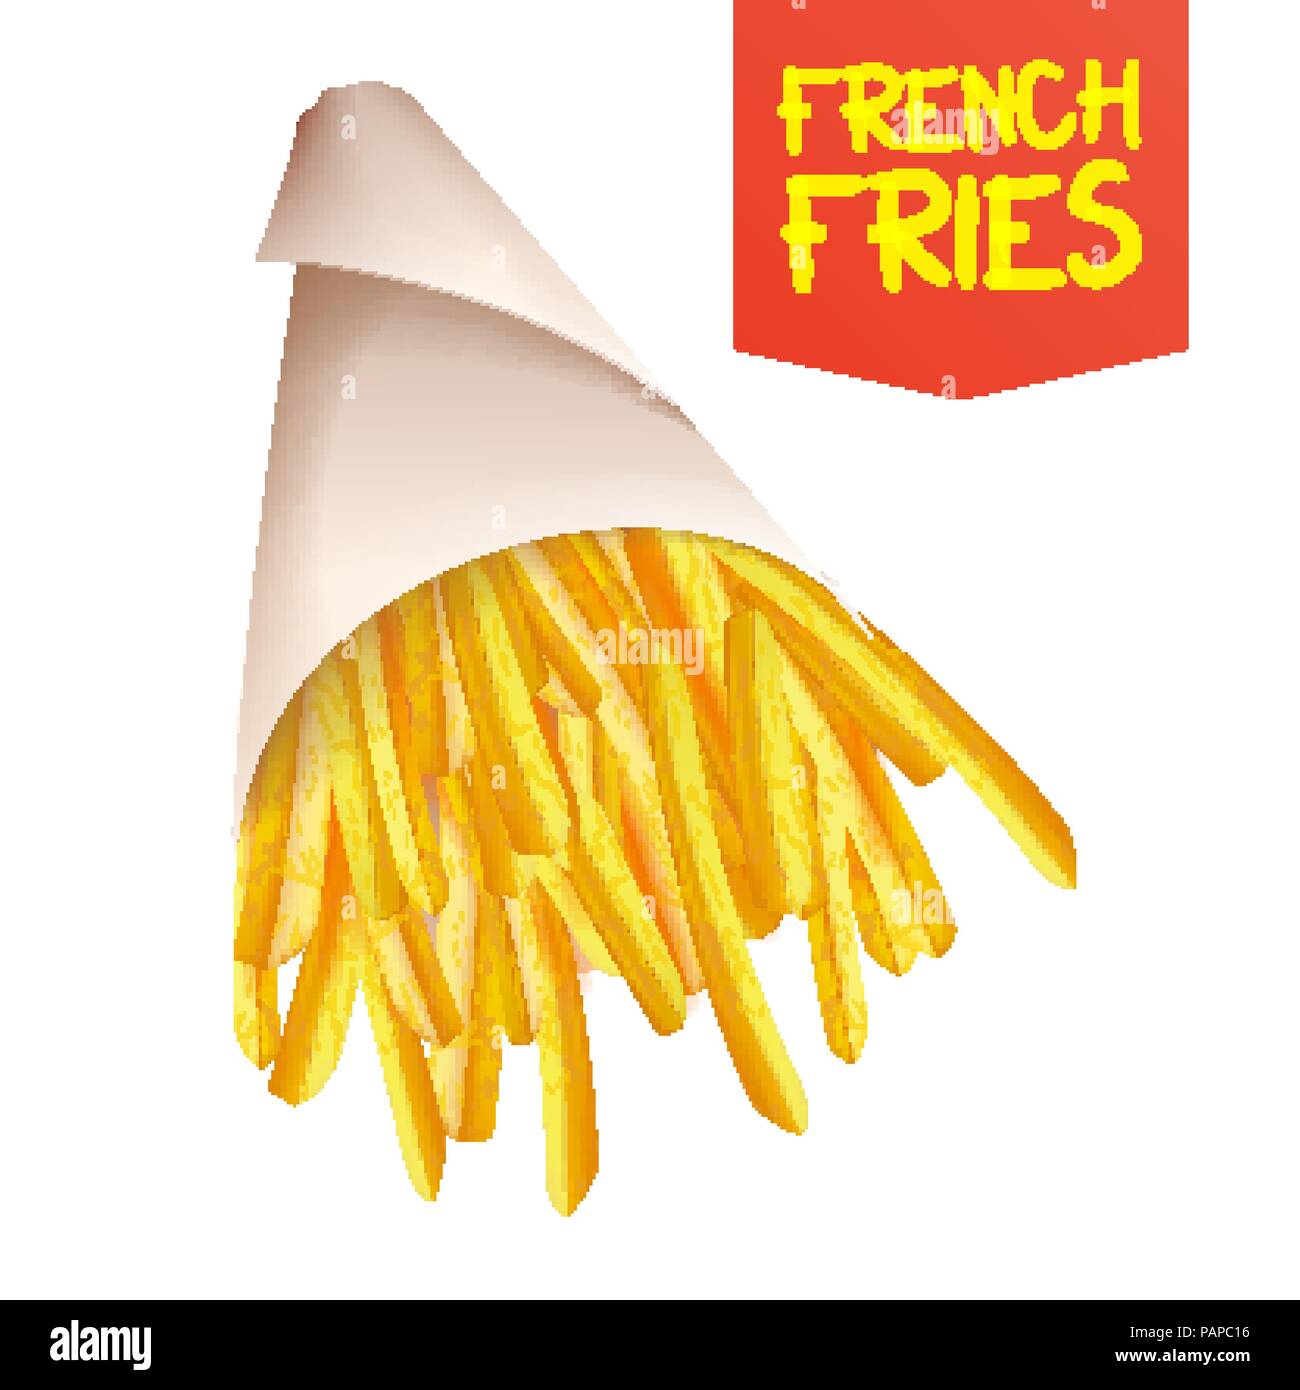 French Fries Potatoes Vector. Paper Bag, Cone. Tasty Fast Food